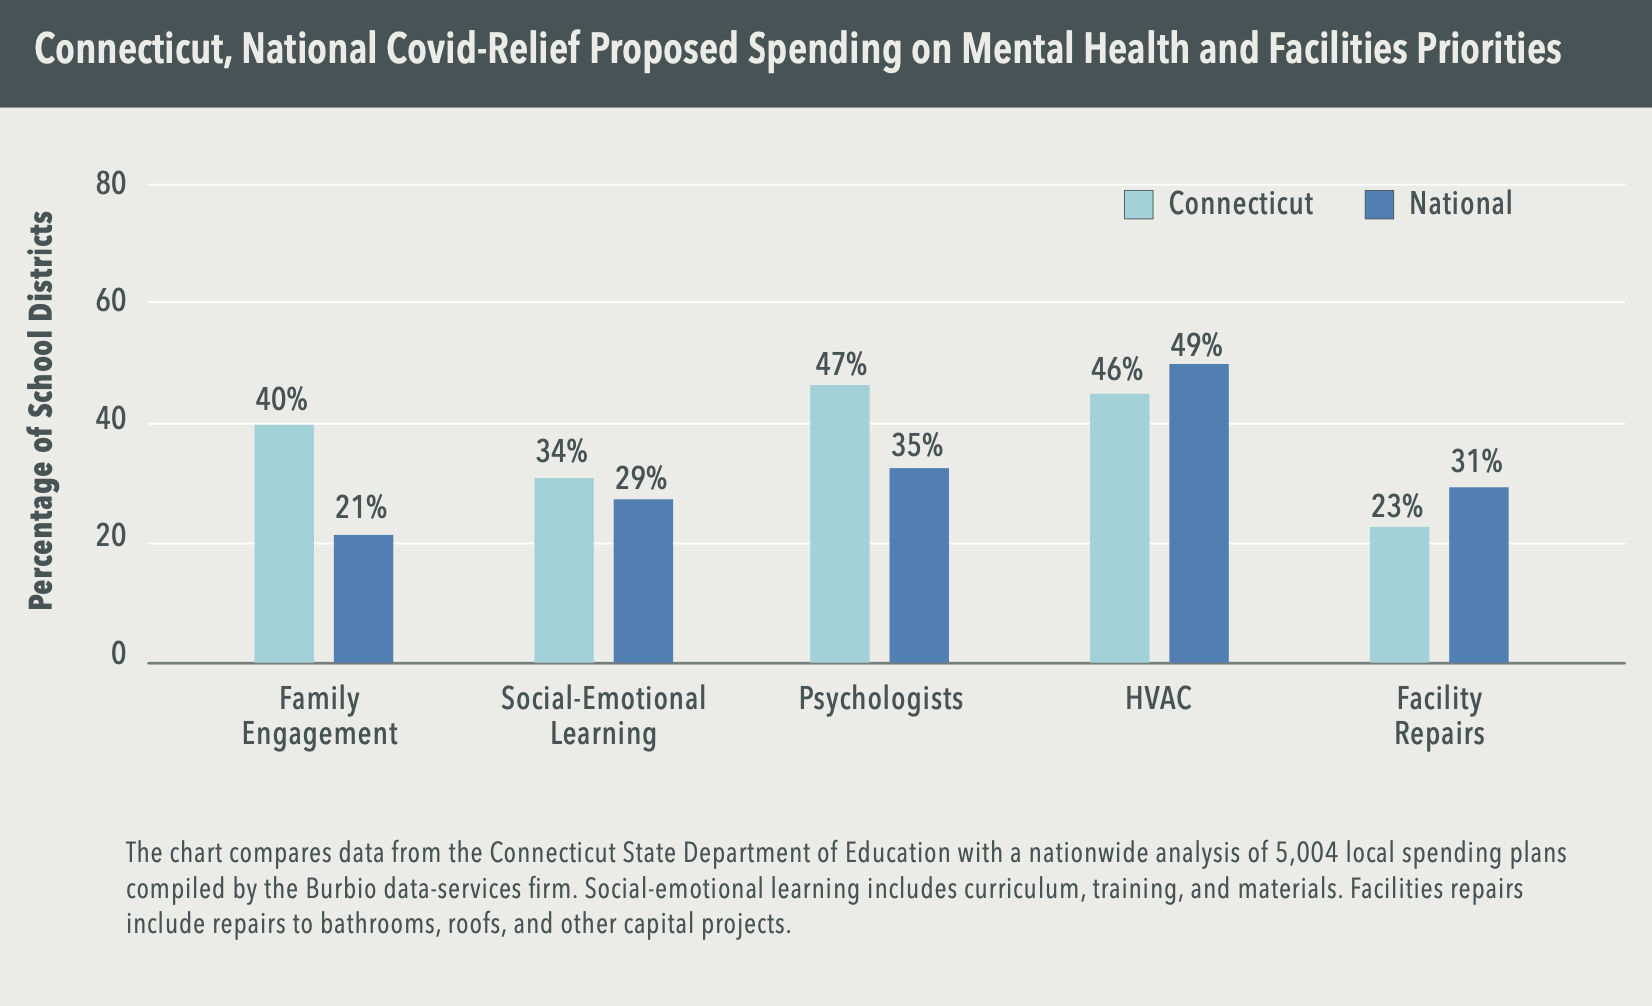 Chart: Connecticut, National Covid-Relief Proposed Spending on Mental Health and Facilities Priorities. Percentage of school districts. Family engagement: 40% Connecticut, 21% national. Social-emotional learning: 34% Connecticut, 29% national. Psychologists: 47% Connecticut, 35% national. HVAC: 46% Connecticut, 49% national. Facility repairs: 23% Connecticut, 31% national. (The chart compares data from the Connecticut State Department of Education with a nationwide analysis of 5,004 local spending plans compiled by the Burbio data-services firm. Social-emotional learning includes curriculum, training, and materials. Facilities repairs include repairs to bathrooms, roofs, and other capital projects.)